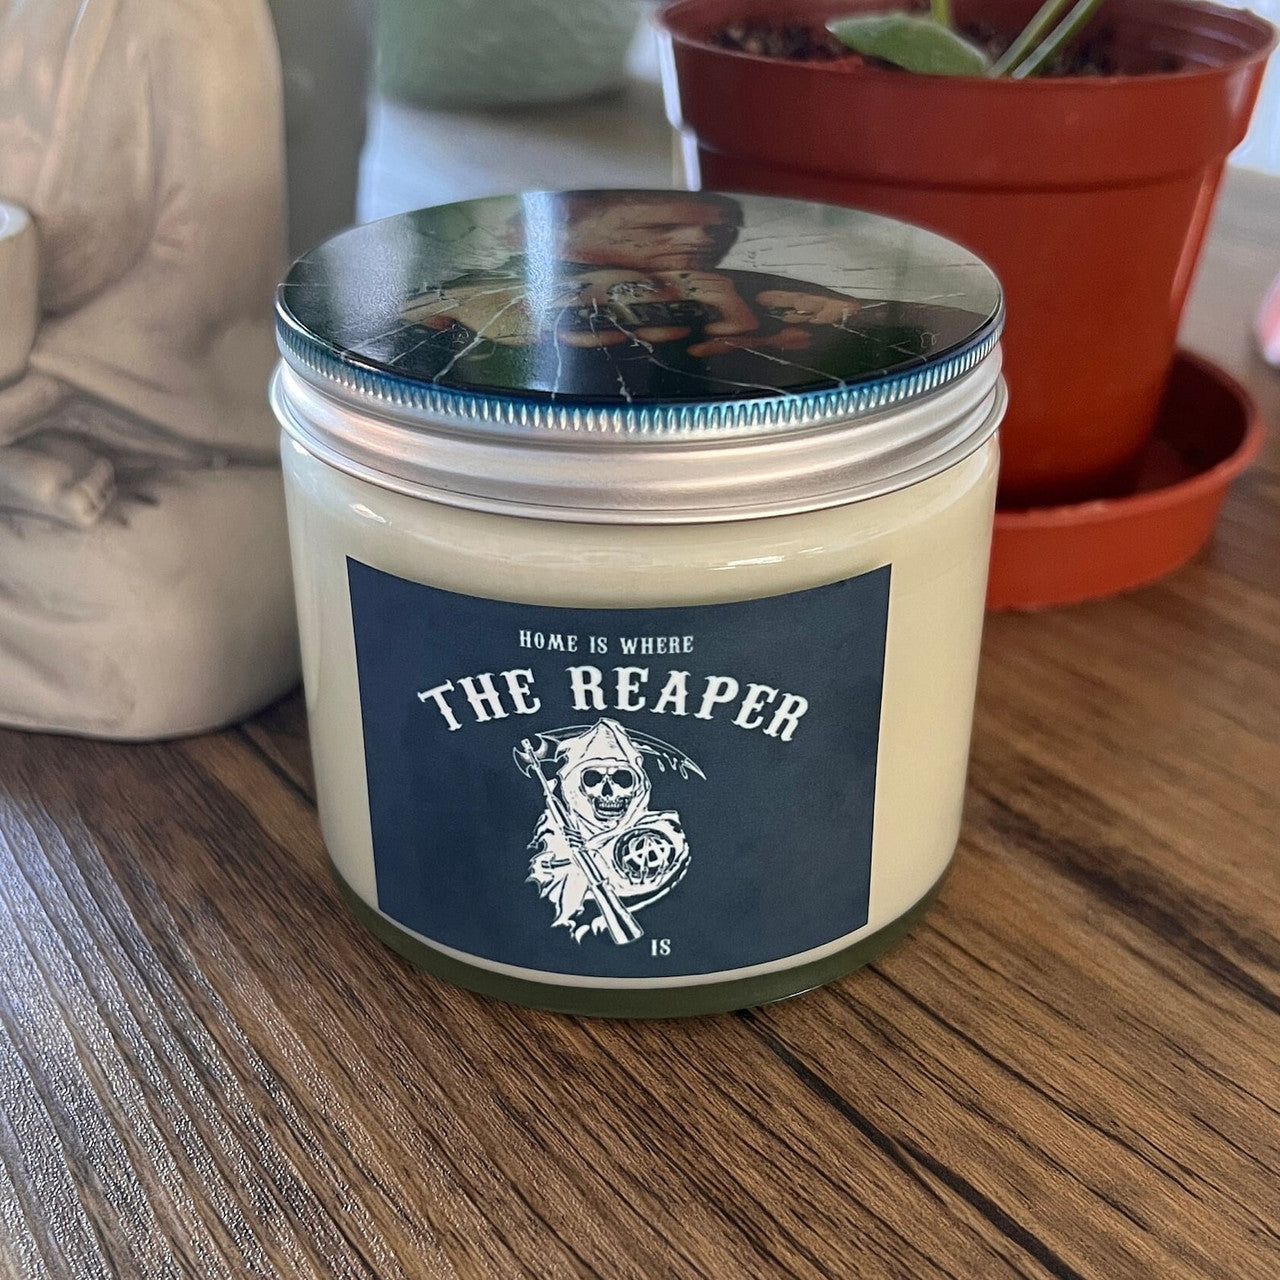 The Reaper KiSS Handmade Candle - Home Is Where - Citrus Floral Musk Scents - SOA Sons of Anarchy Redwood